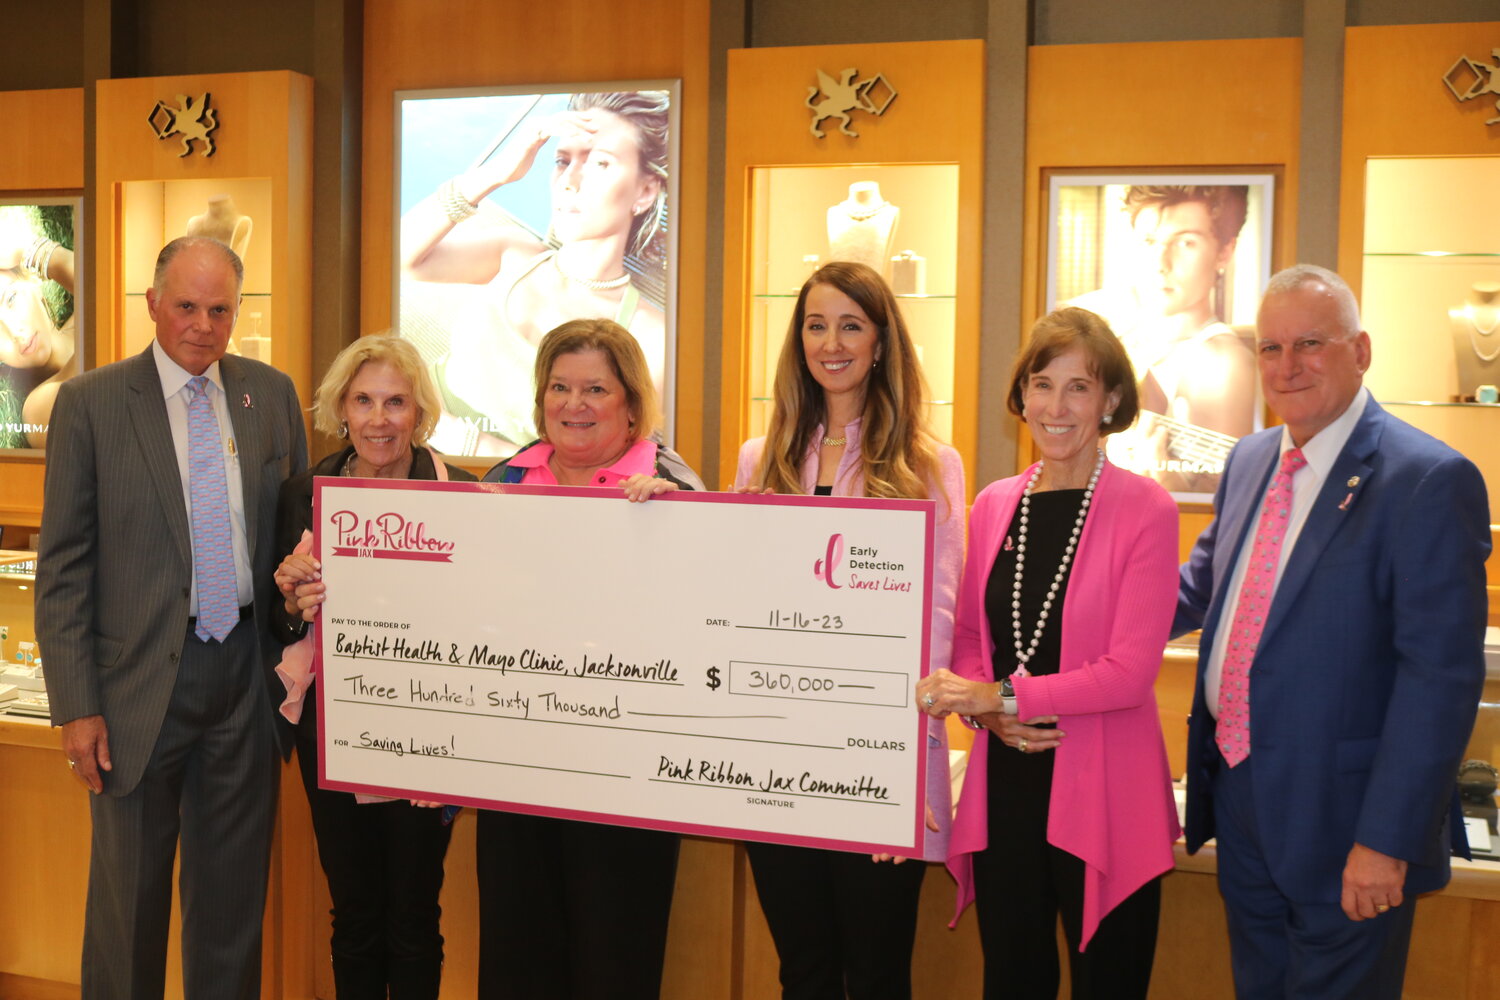 Clayton Bromberg and Christy Bromberg of Underwood Jewelers presented Marica Pendjer and members of Pink Ribbon Jax with a check for $360,000 during an event on Nov. 16.